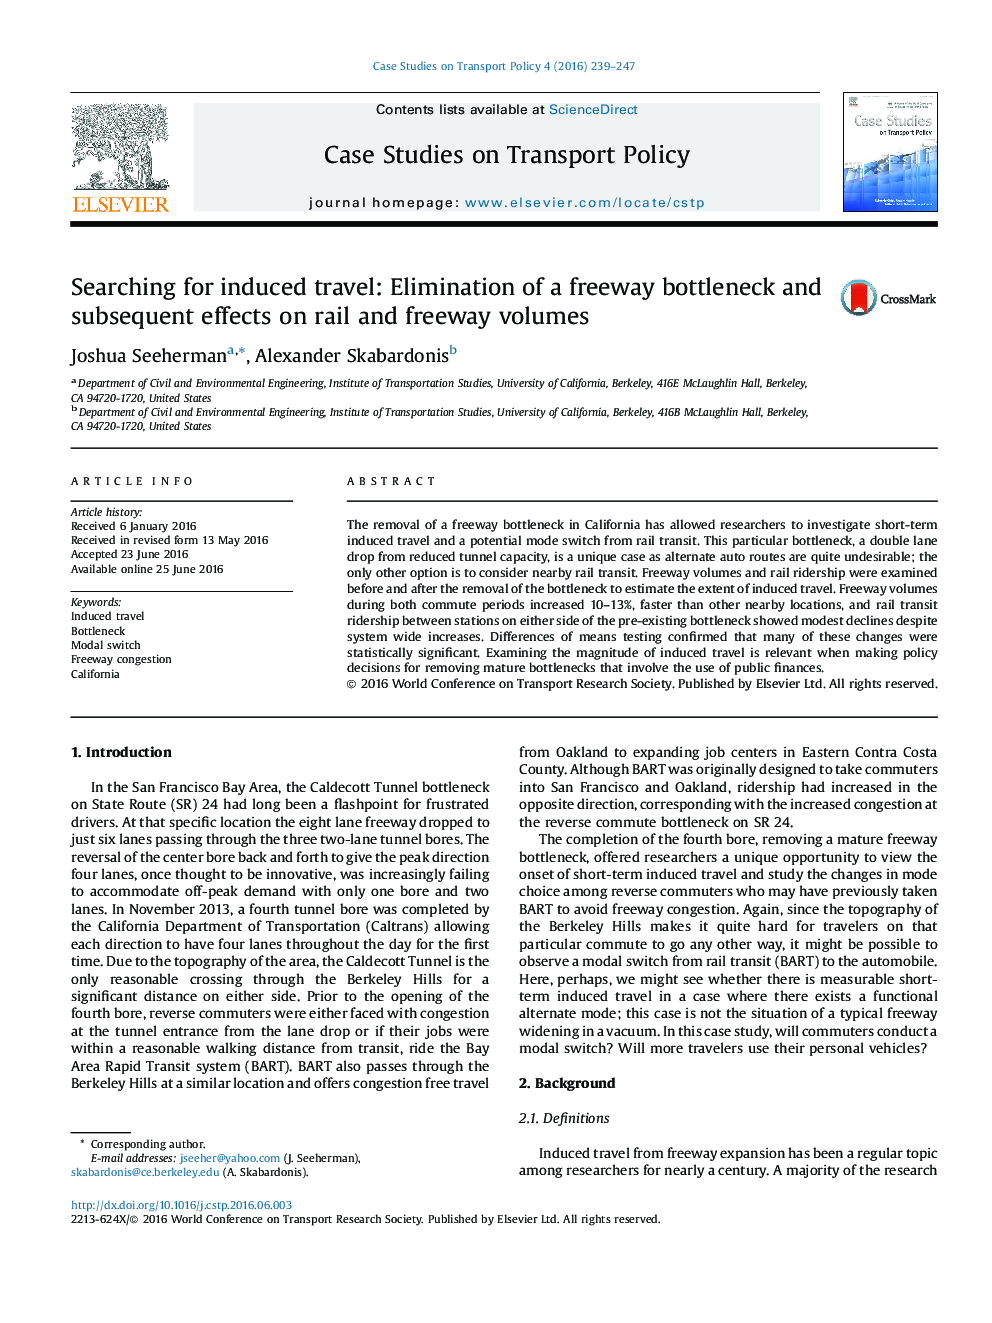 Searching for induced travel: Elimination of a freeway bottleneck and subsequent effects on rail and freeway volumes